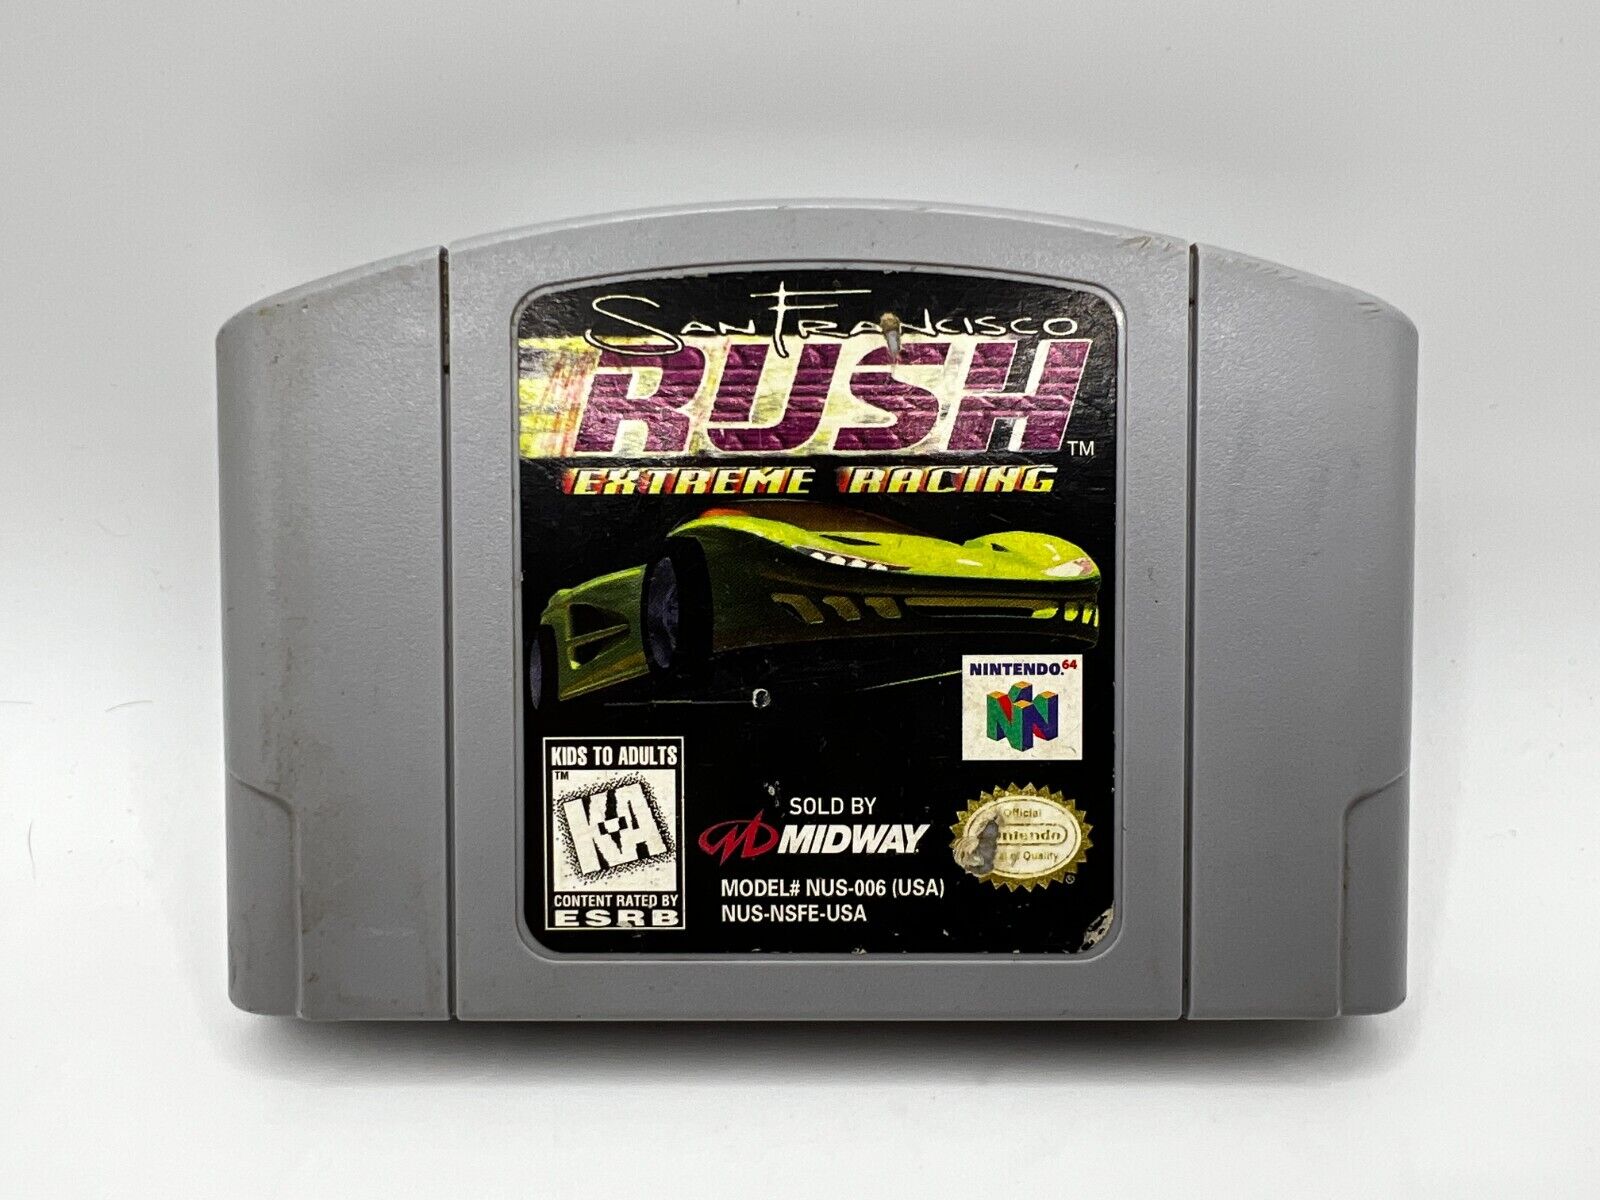 San Francisco Rush Extreme Racing Nintendo 64 N64 Authentic Cartridge Only